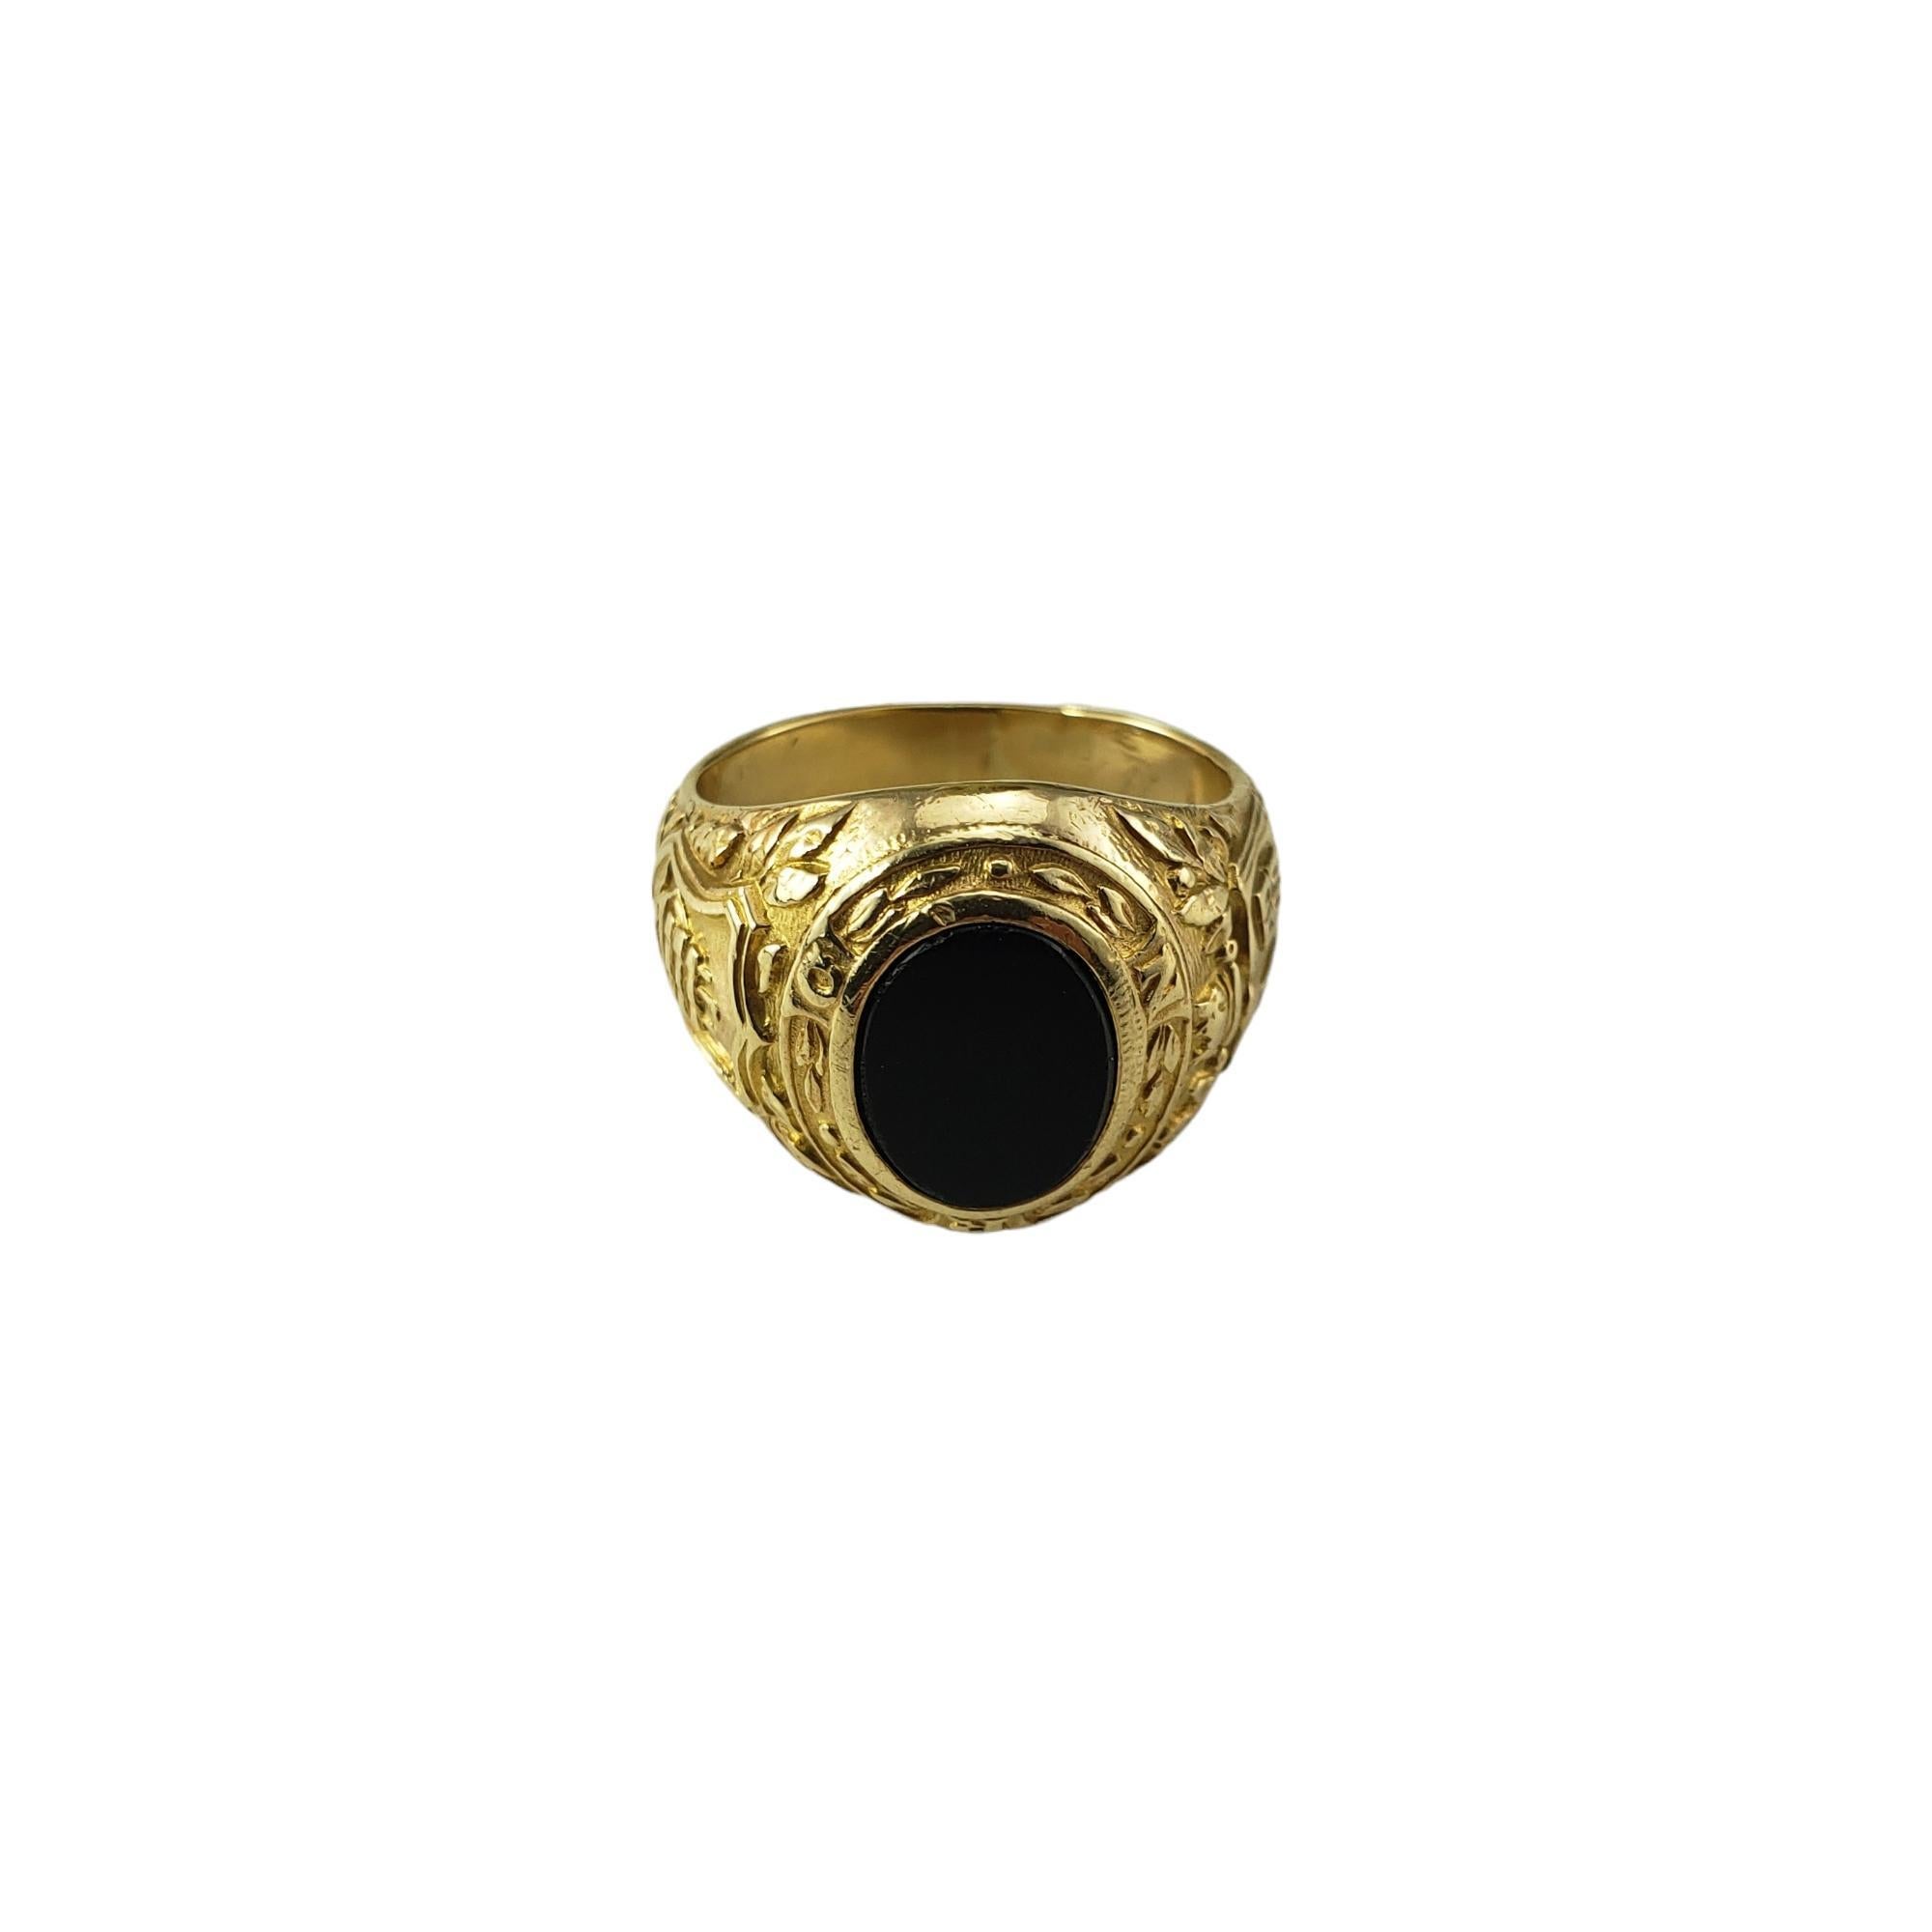 Vintage Tiffany & Co. 14K Yellow Gold 1933 College Ring Size 5.25

This unique 1933 College of New Rochelle ring features oval black onyx set in beautifully detailed 14K yellow gold by Tiffany & Co.  Inner inscription reads 